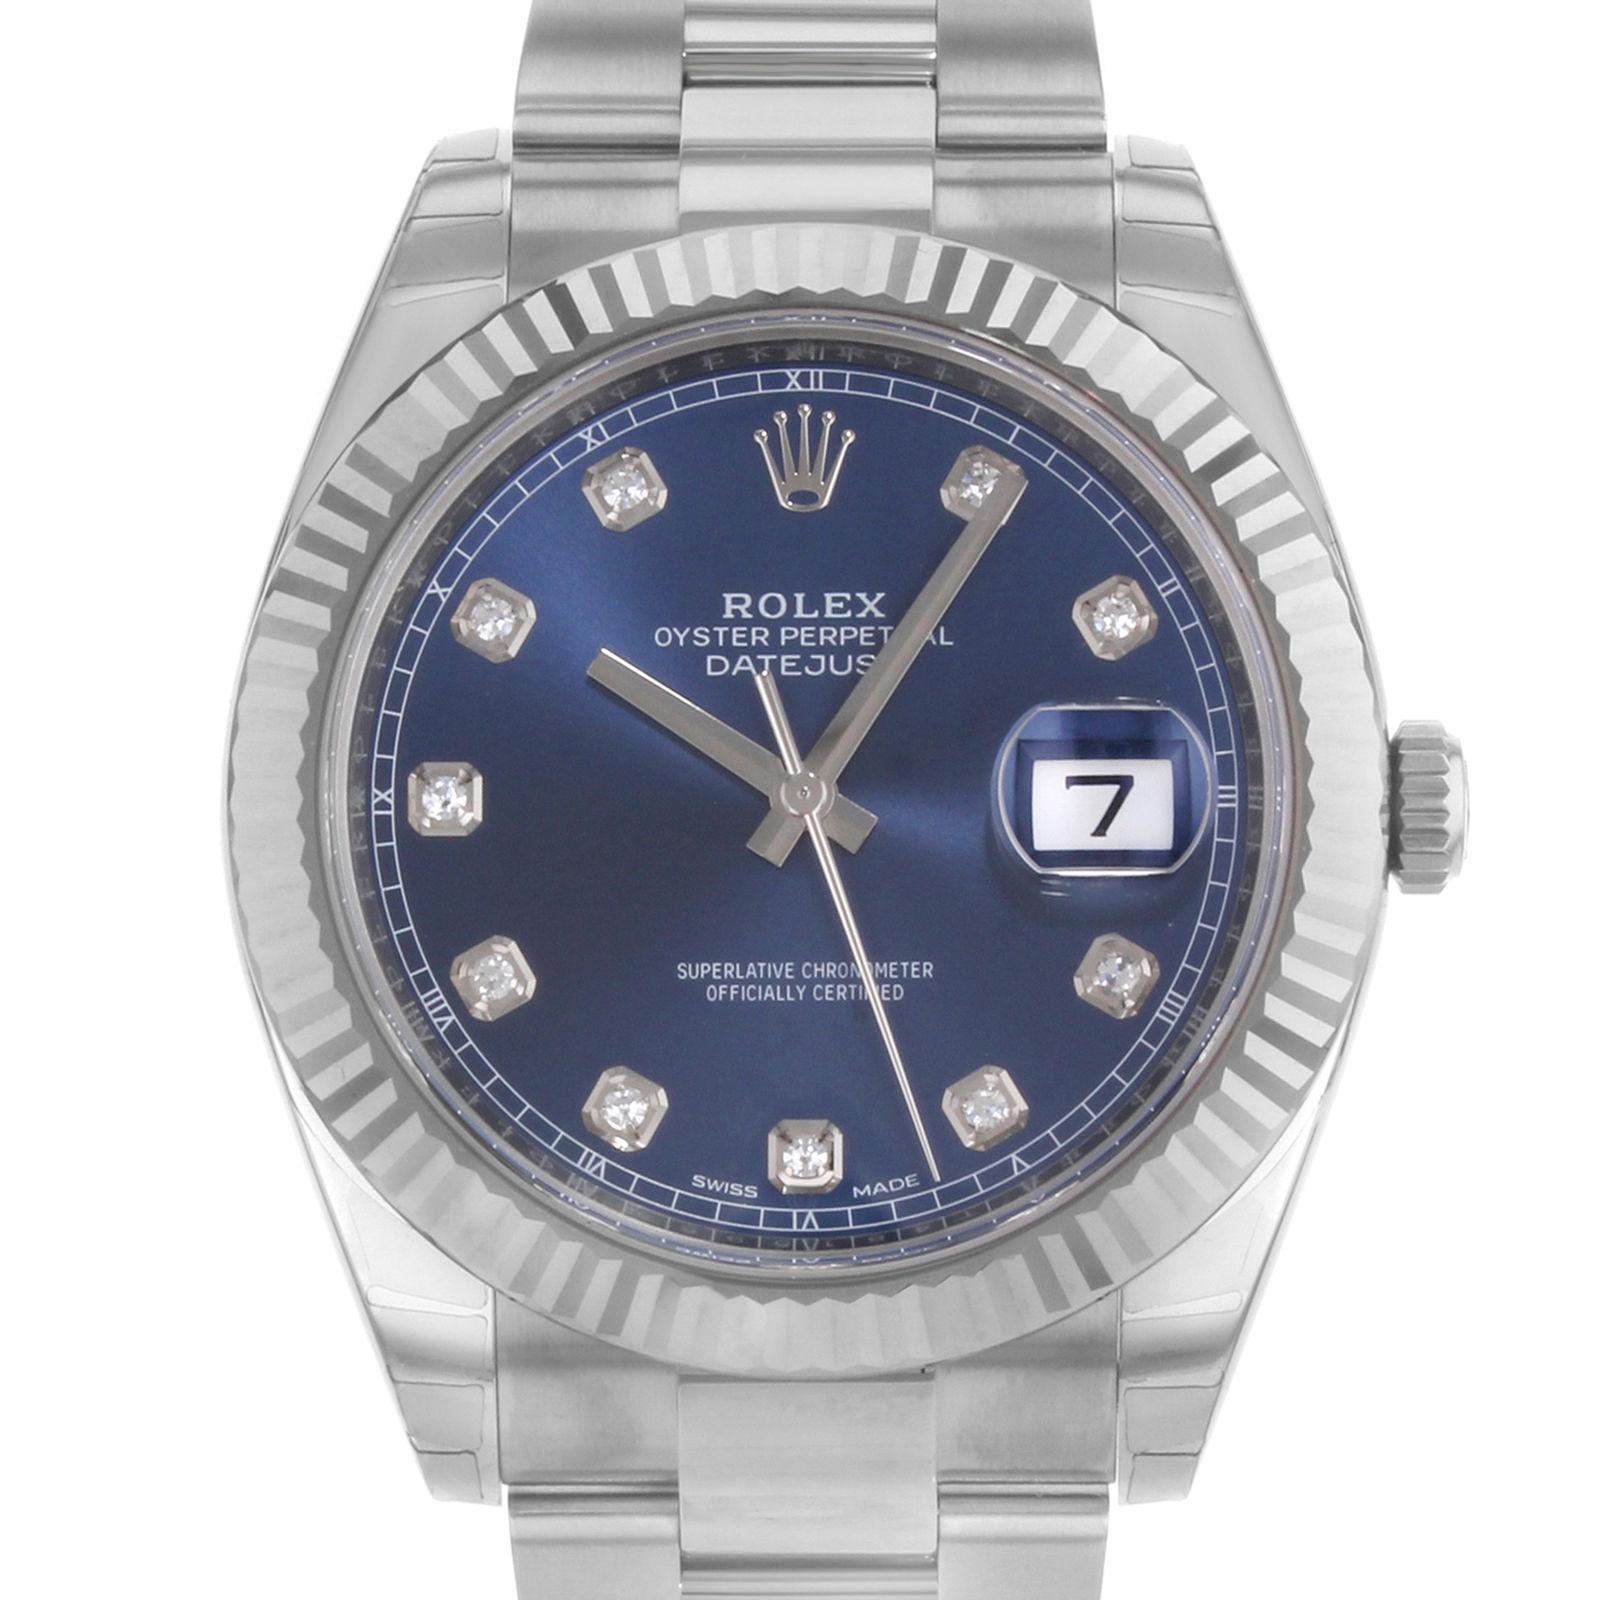 (16863)
This brand new Rolex Datejust 41 126334 is a beautiful men's timepiece that is powered by an automatic movement which is cased in a stainless steel case. It has a round shape face, date, diamonds dial and has hand diamonds style markers. It